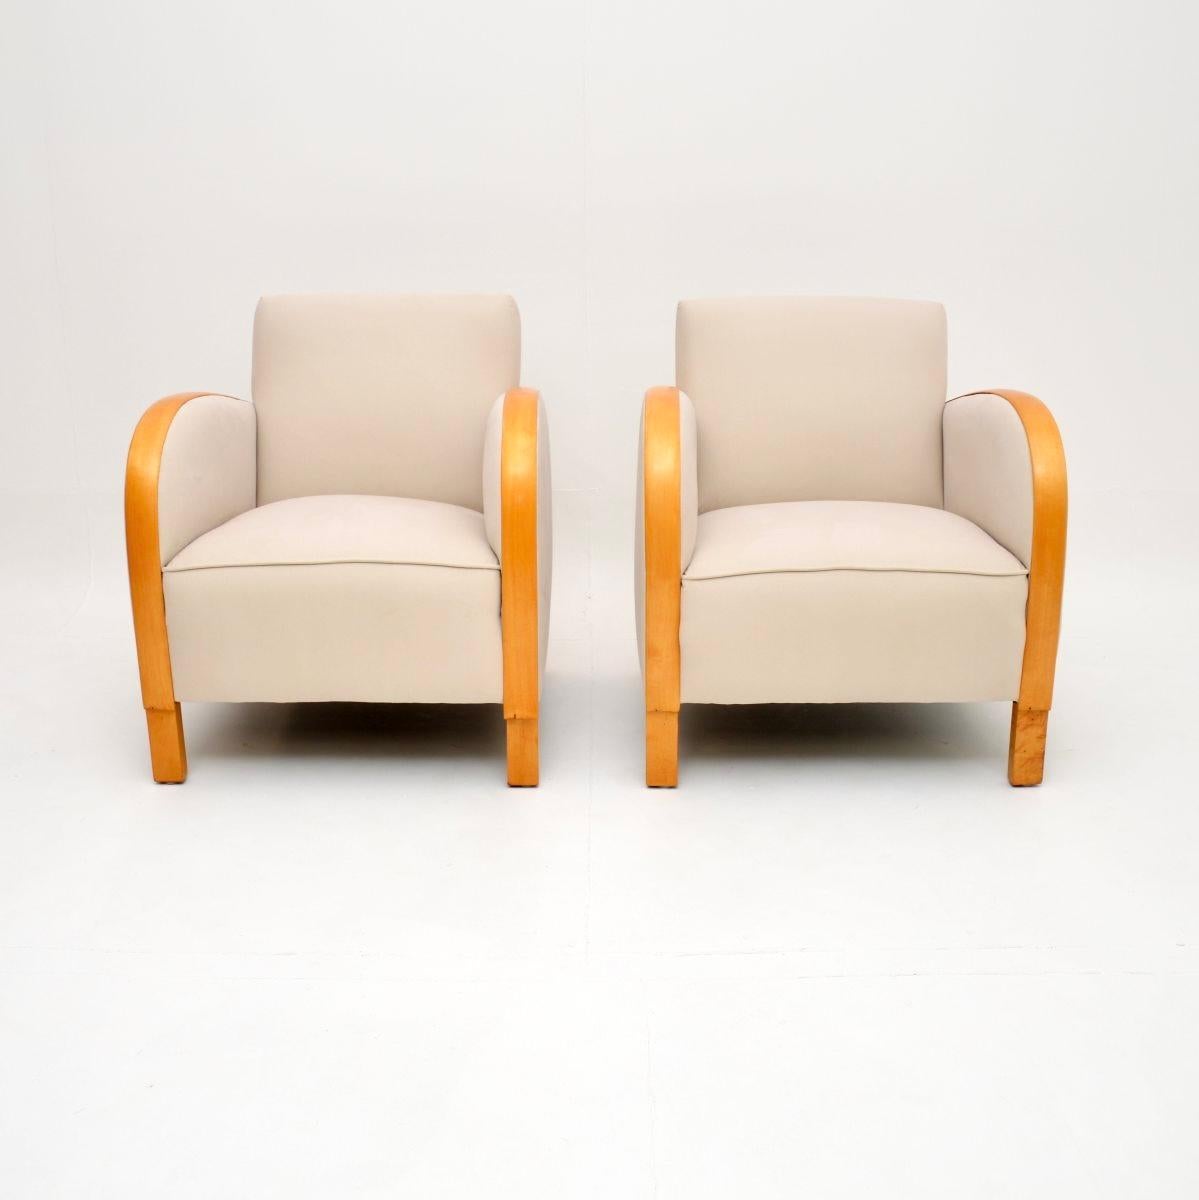 A stylish and very well made pair of Art Deco armchairs in satin birch. They were recently imported from Sweden, they date from the 1930’s.

The quality is excellent, they are well sprung and very comfortable. The sweeping satin birch arms curve